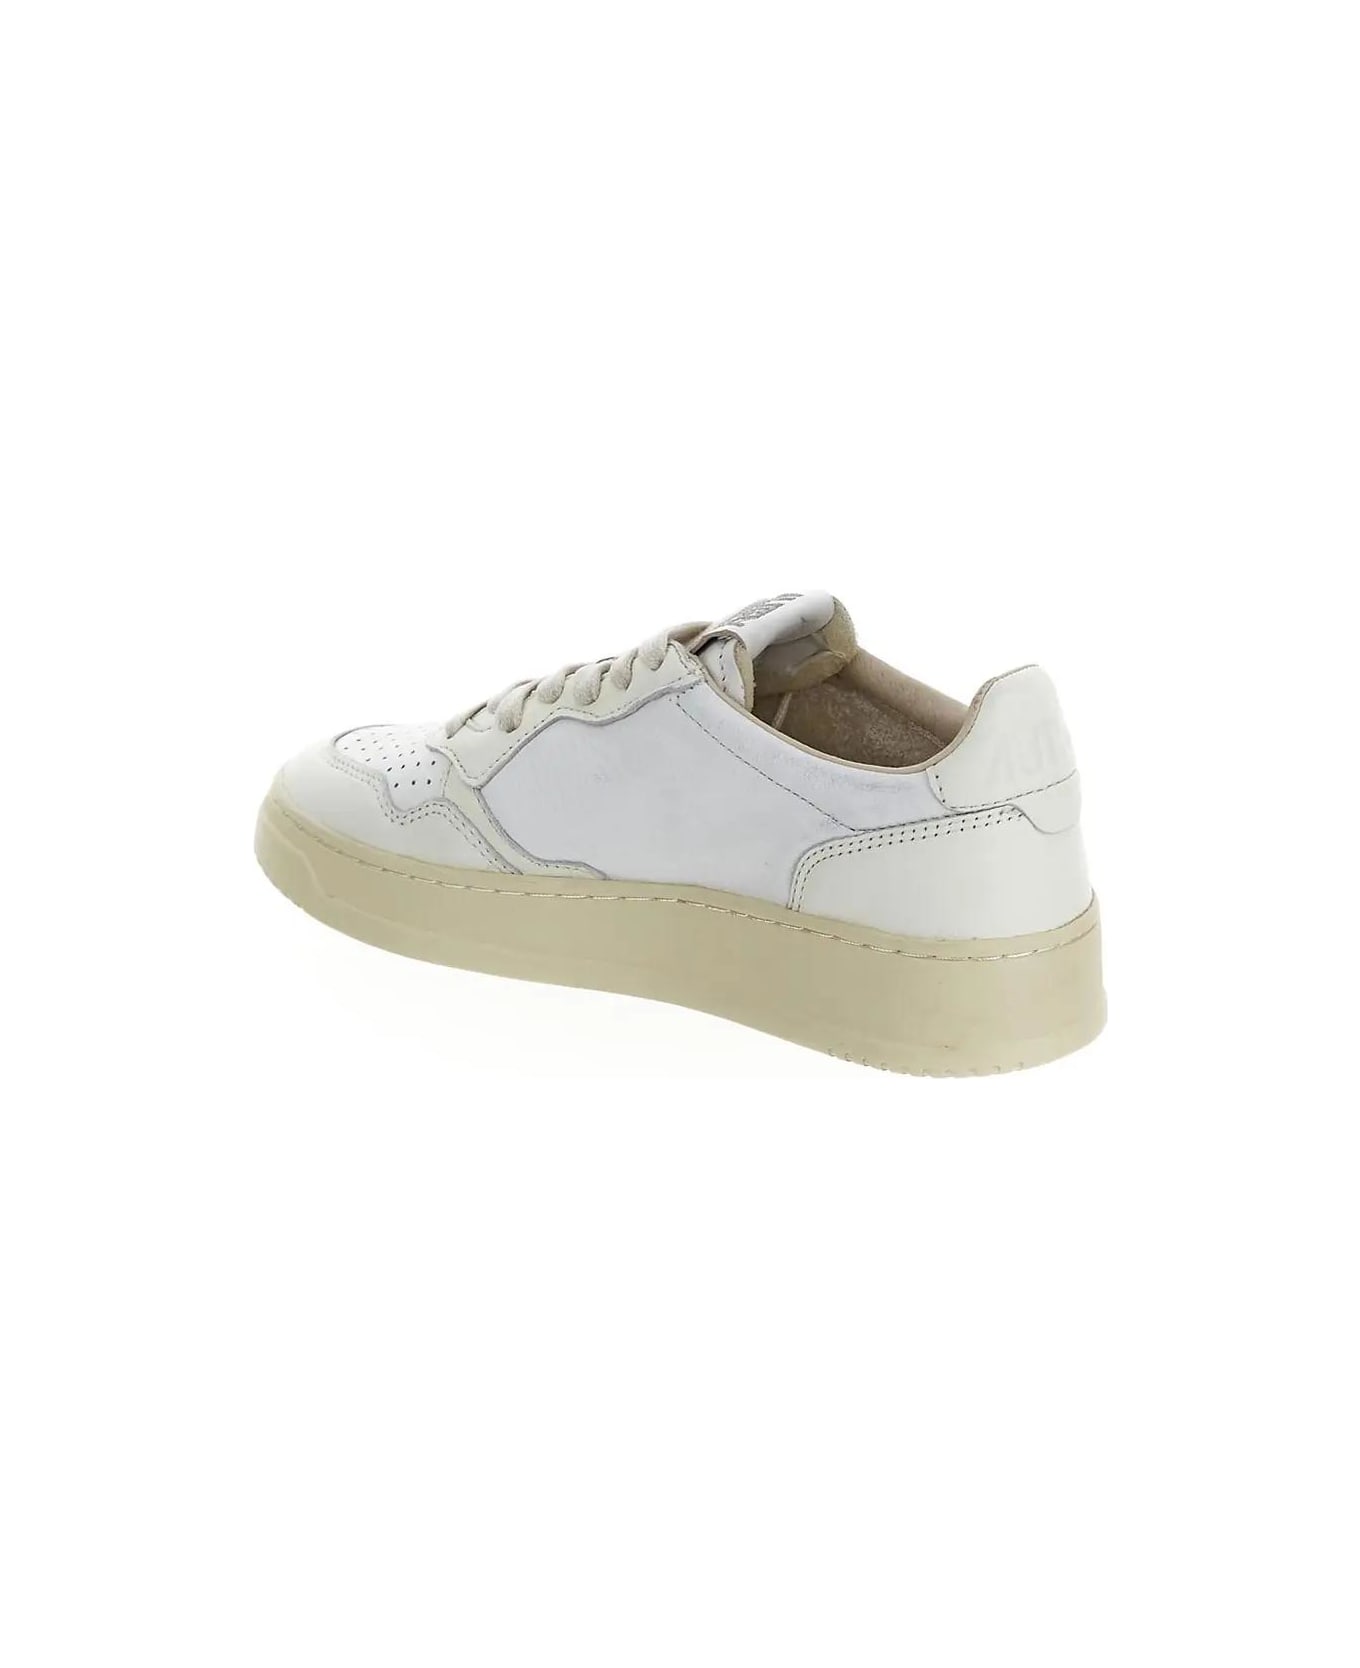 Autry Medalist Low Sneakers - WHT/WHT スニーカー